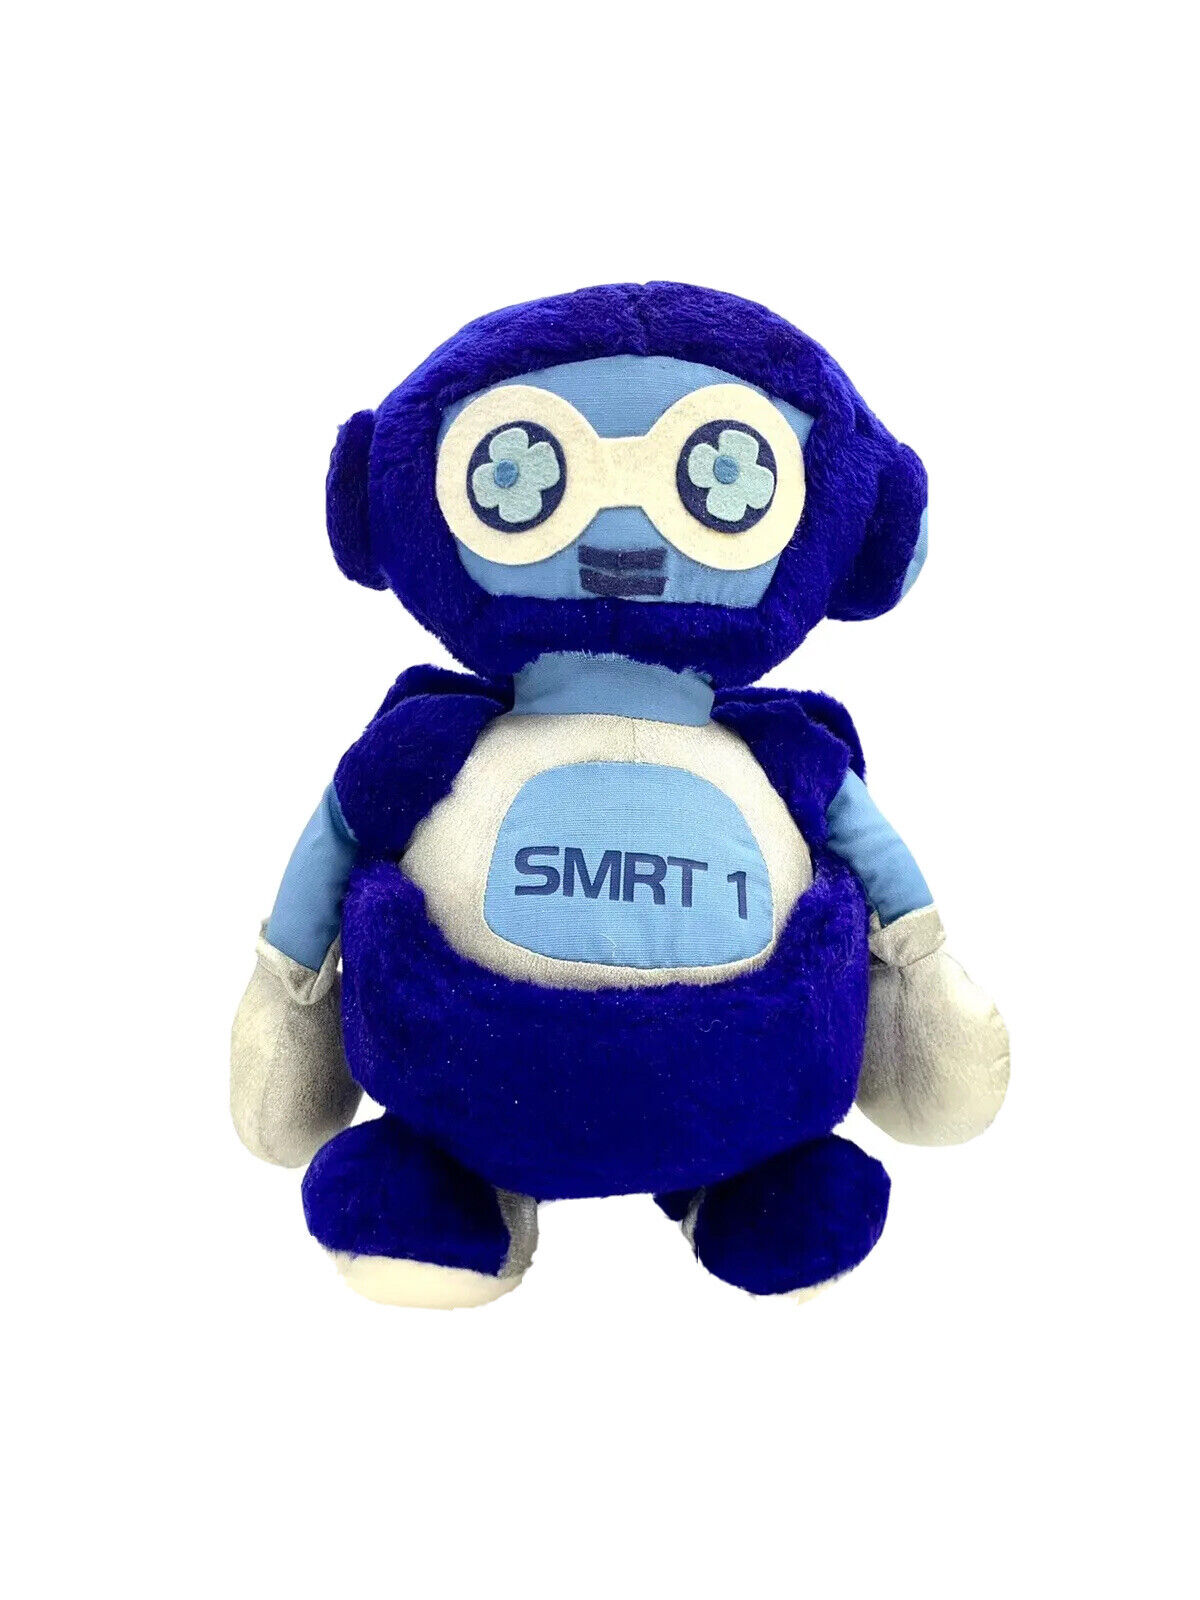 Disney Rare Smrt-1 Plush Robot Epcot Vintage Limited Edition Collectible Toy